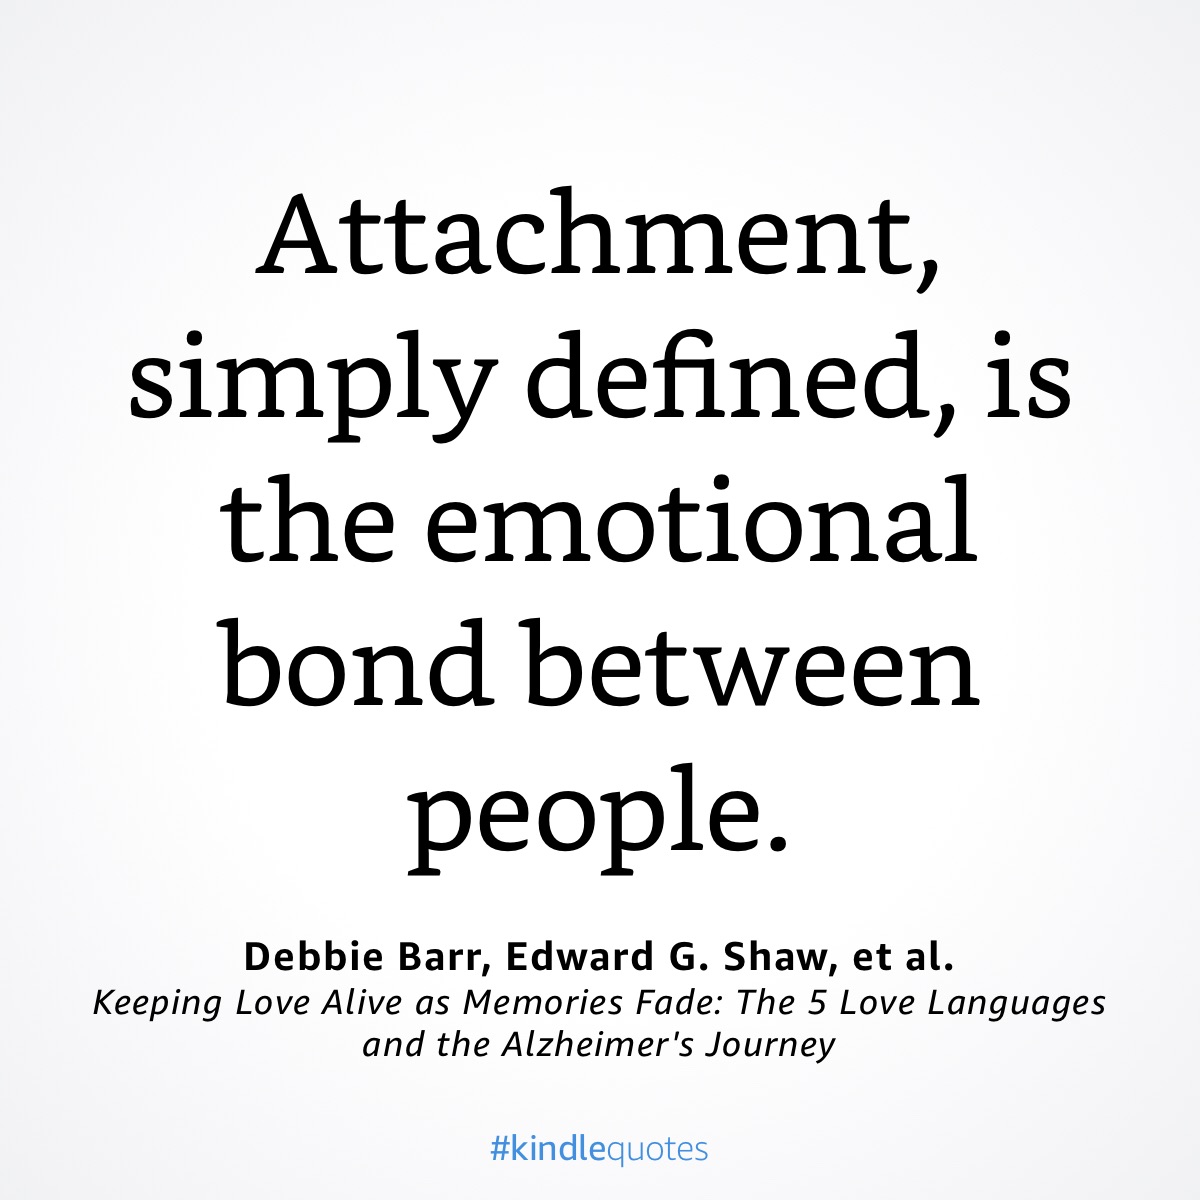 "Attachment, simply defined, is the emotional bond between people." Quote from Keeping Love Alive as Memories Fade: The 5 Love Languages and the Alzheimer's Journey by Debbie Barr & Edward G. Shaw